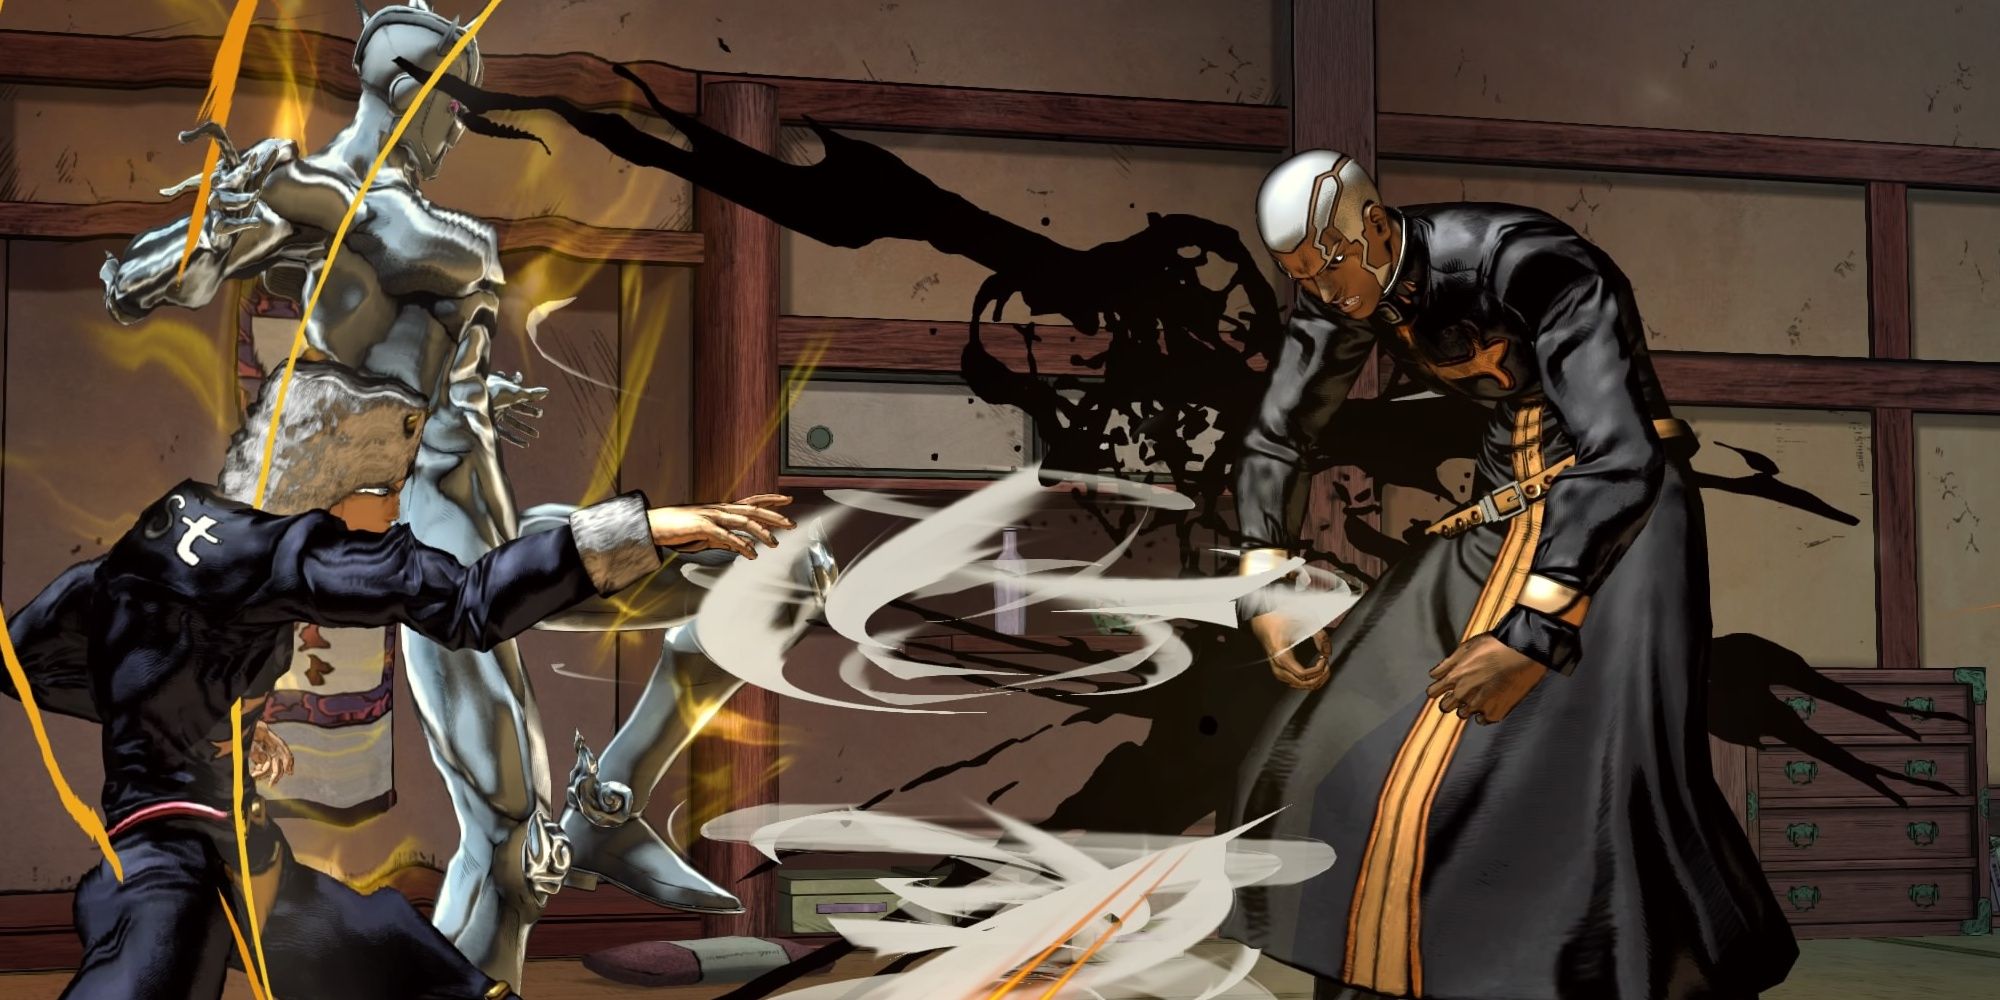 Weather Report and his Stand hit Pucci with a gust of wind JoJo's Bizarre Adventure All-Star Battle R